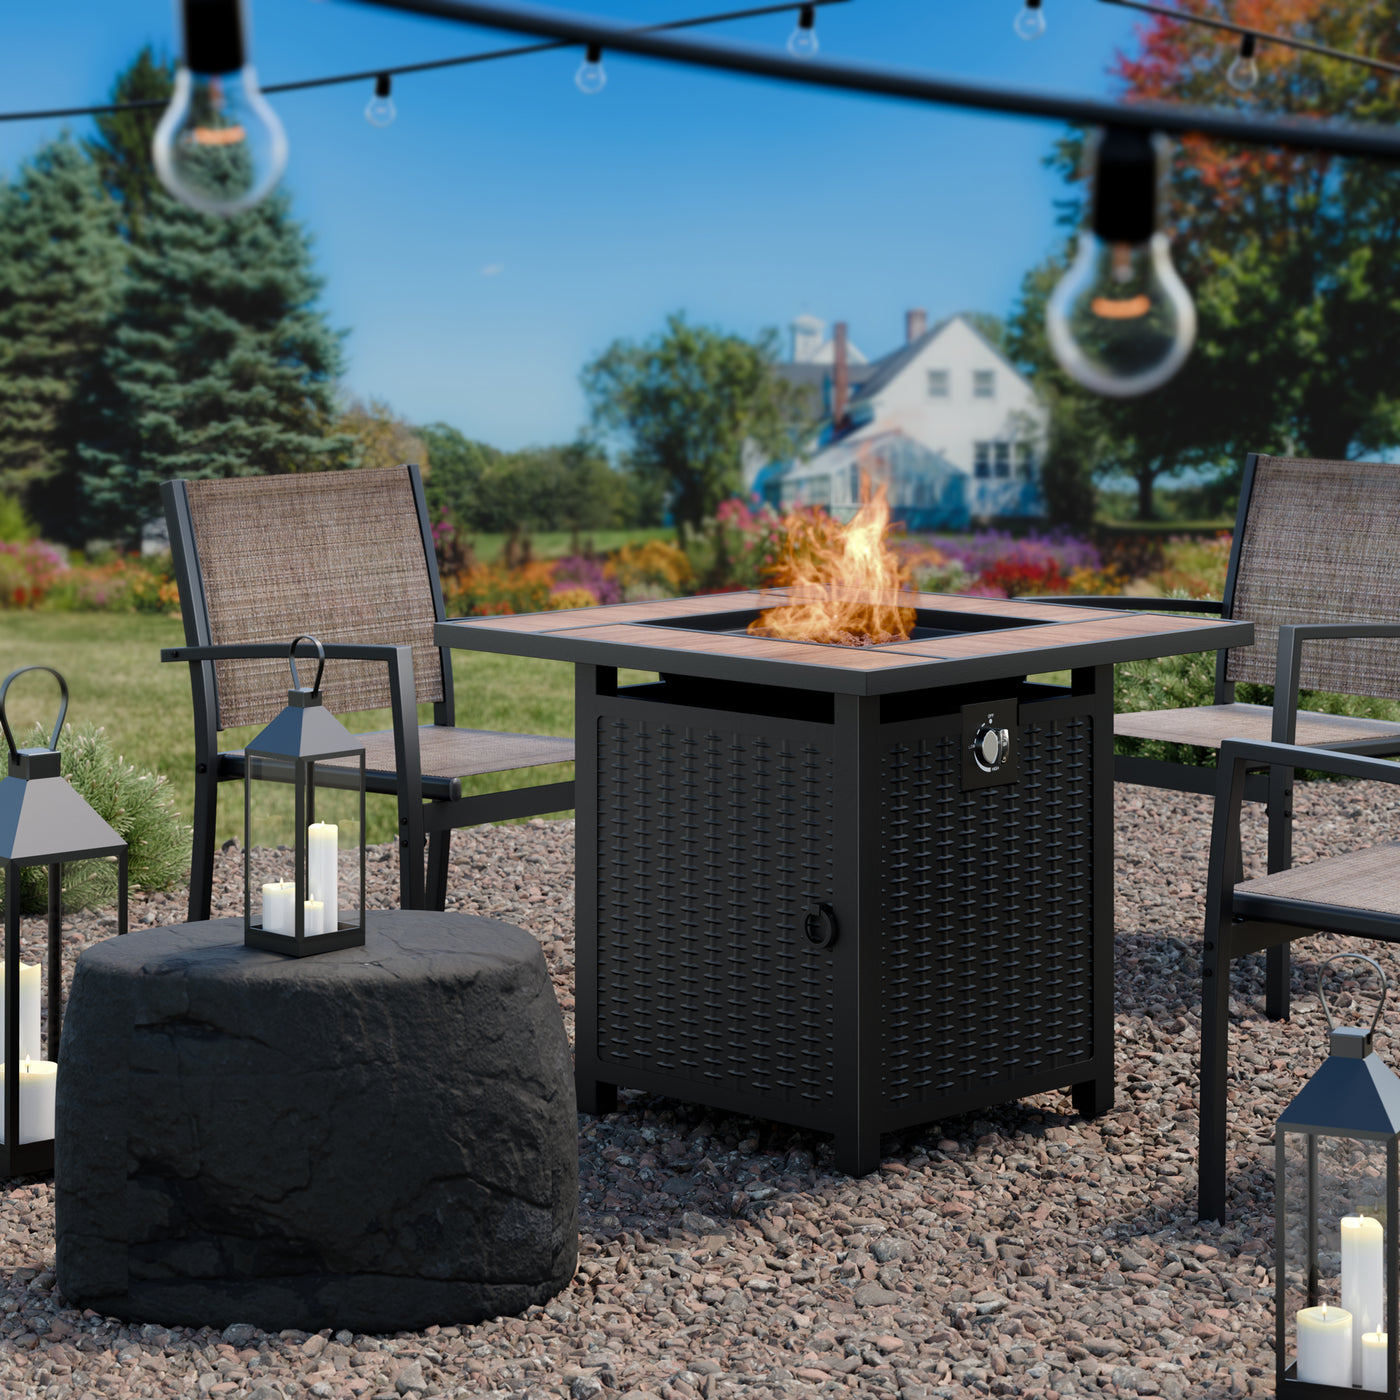 Walsunny 28" Propane Gas Fire Pit Table 50,000 BTU Square Outdoor Wicker